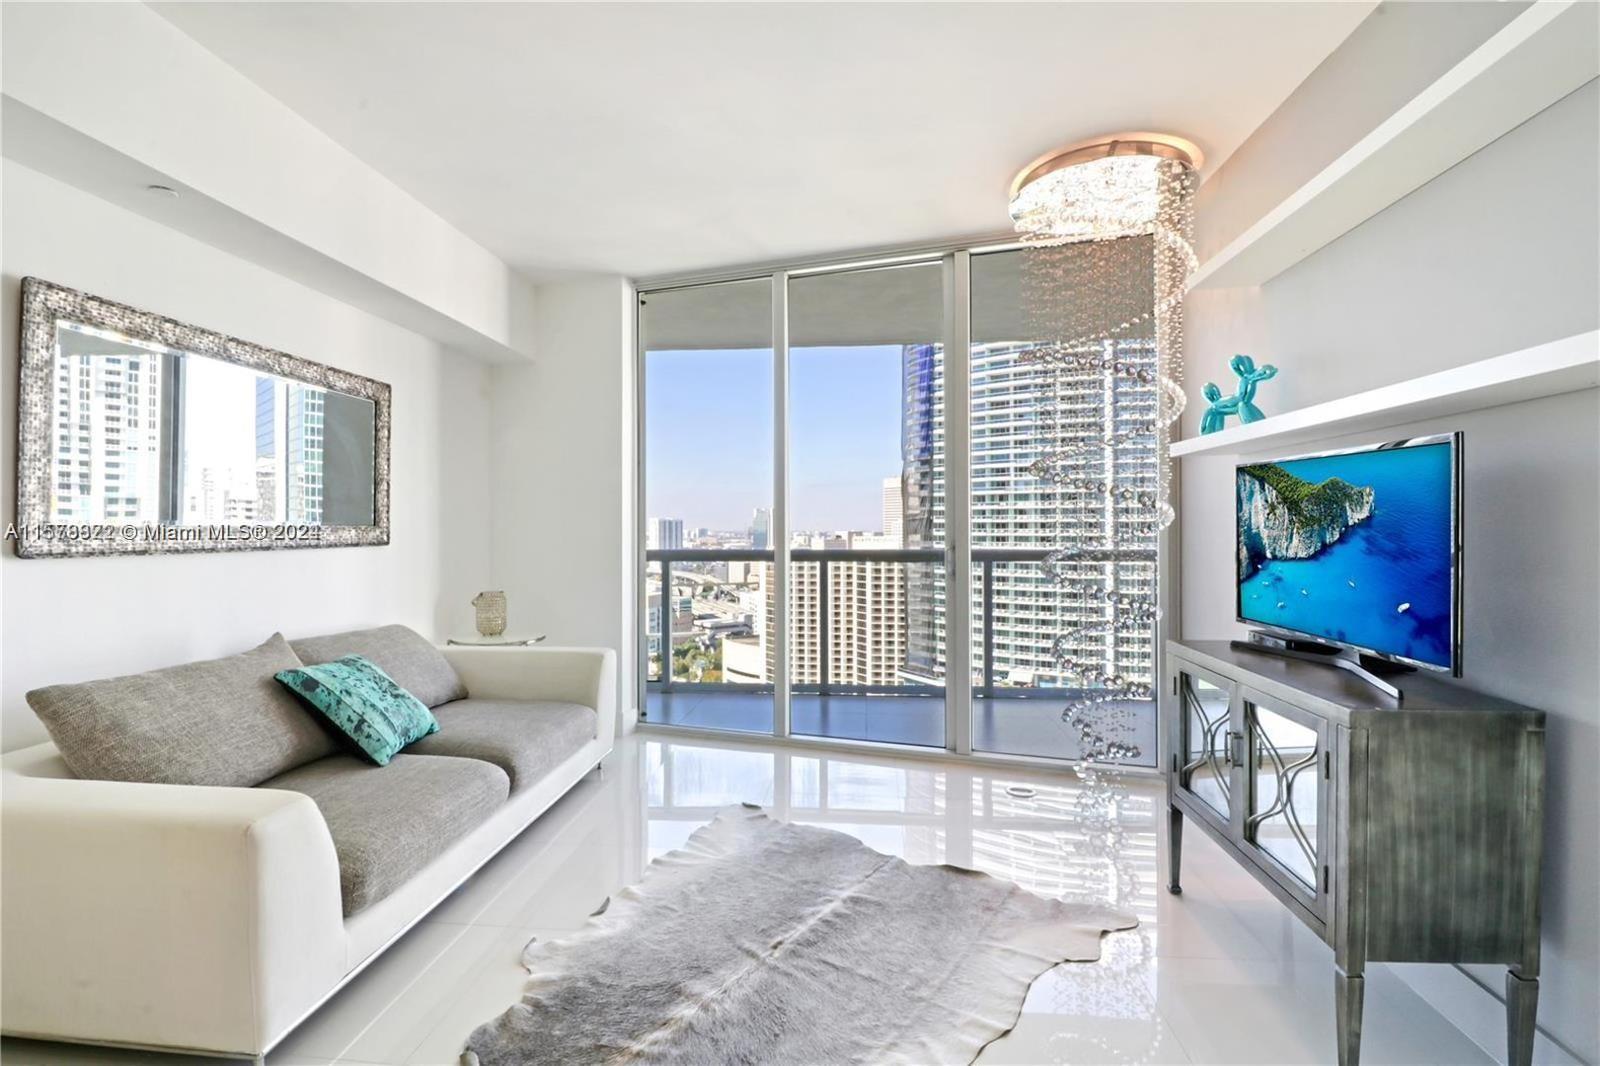 Impeccable fully furnished 1 Master Bedroom apartment on 27th floor w/ large balcony overlooking the Miami
River & Downtown Miami. Unit is in great condition & well maintained. Unit features include tile flooring
throughout, top of the line appliances, Italian kitchen cabinets, built-in closets, & blackout shades. 1 assigned
parking. Building offers resort-style amenities 24-hr concierge & valet service, convenience store, world class spa,
newly renovated fitness center, spectacular 1 acre terrace deck w/ Olympic sized infinity pool overlooking Biscayne
Bay, private theater, 2 world-renowned on site restaurants Cipriani & Cantina La Viente, walking distance from
Brickell City Centre & local restaurants. Tenant occupied 24 hour notice to show.